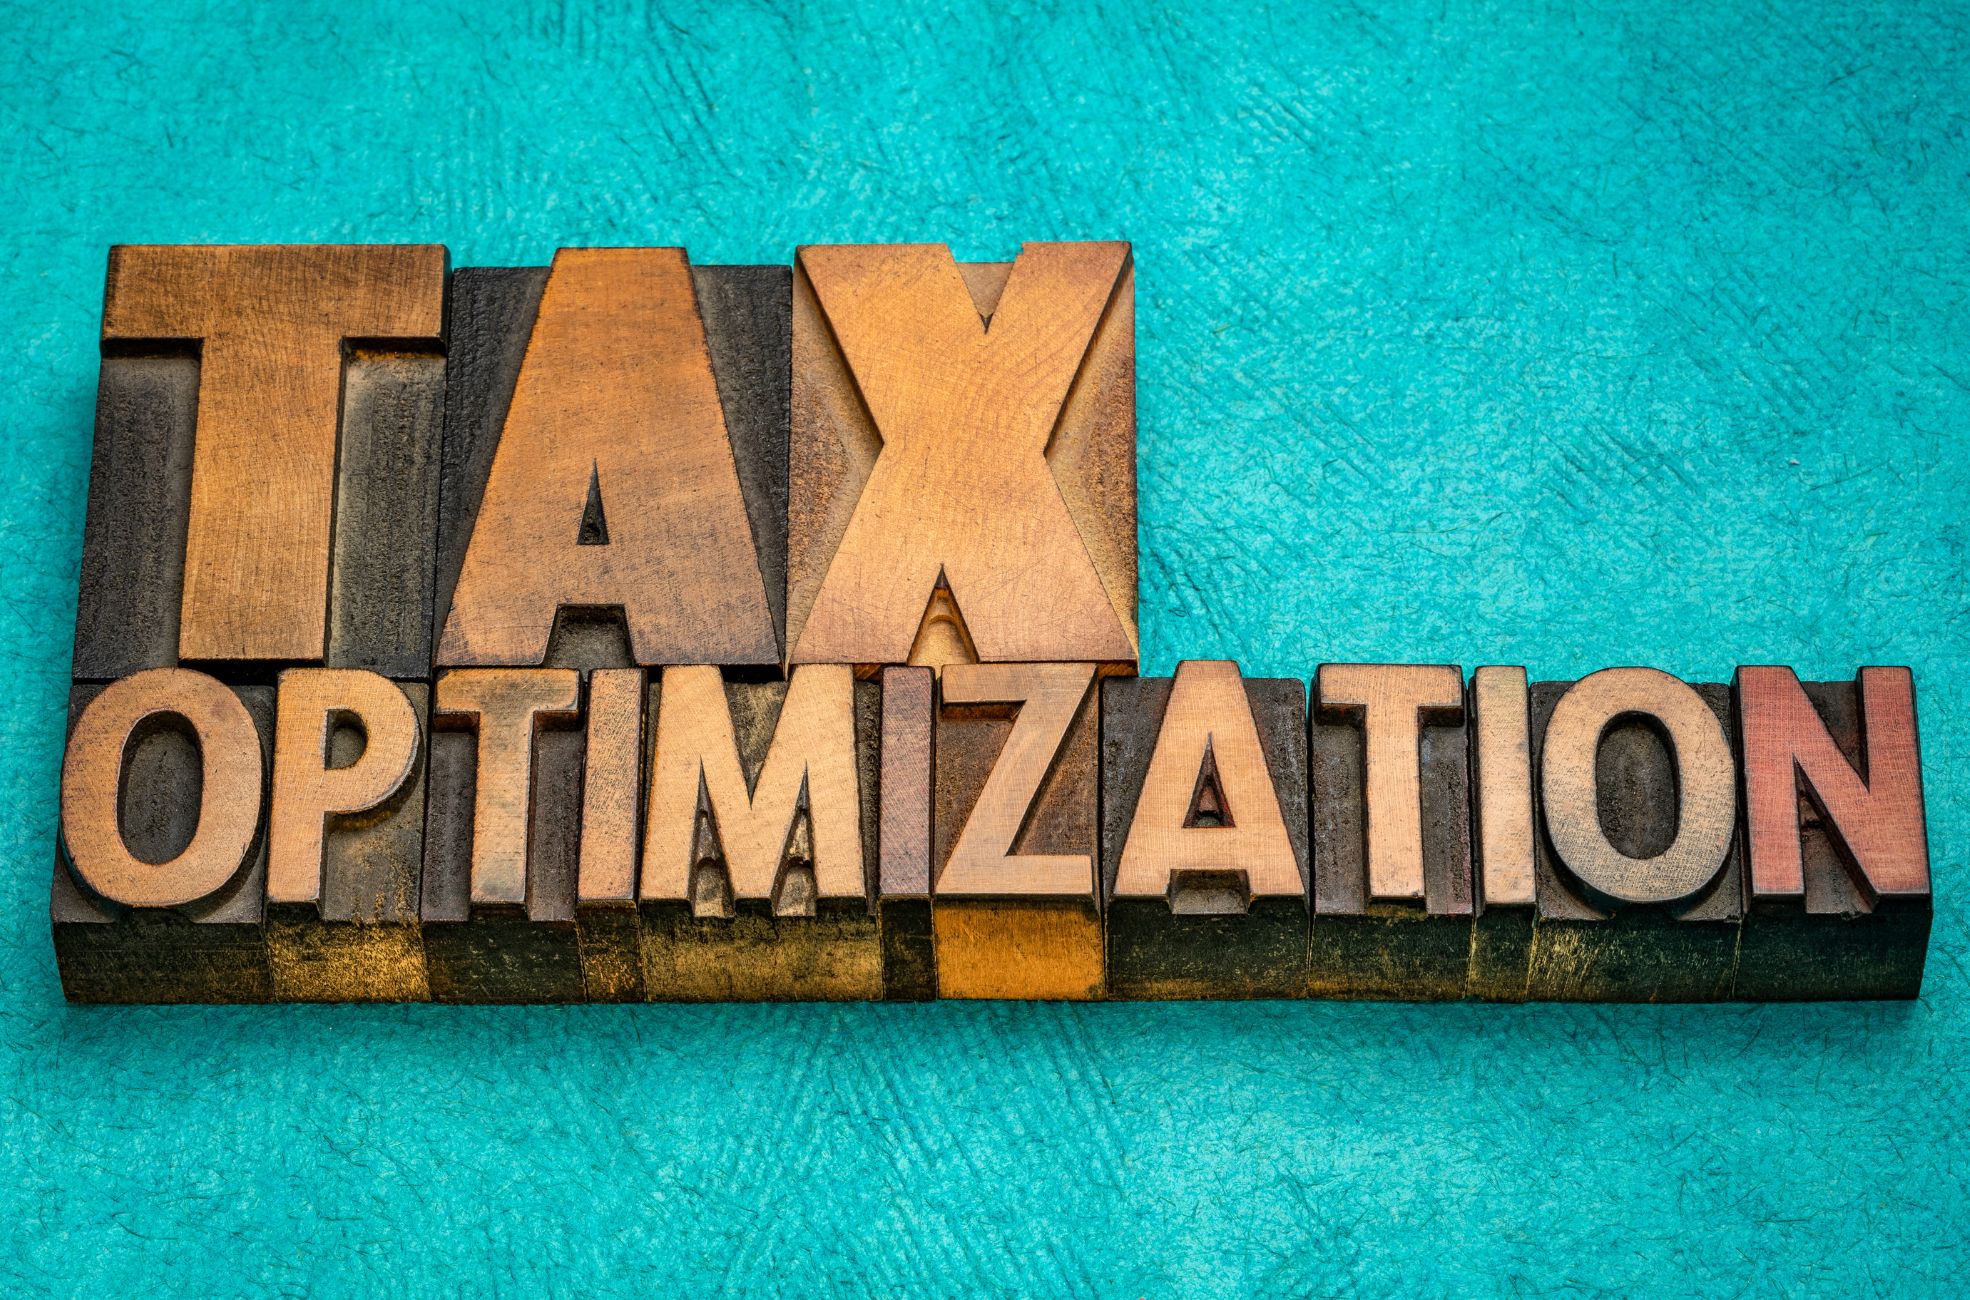 Block Words On Teal Background Reading "Tax Optimization"